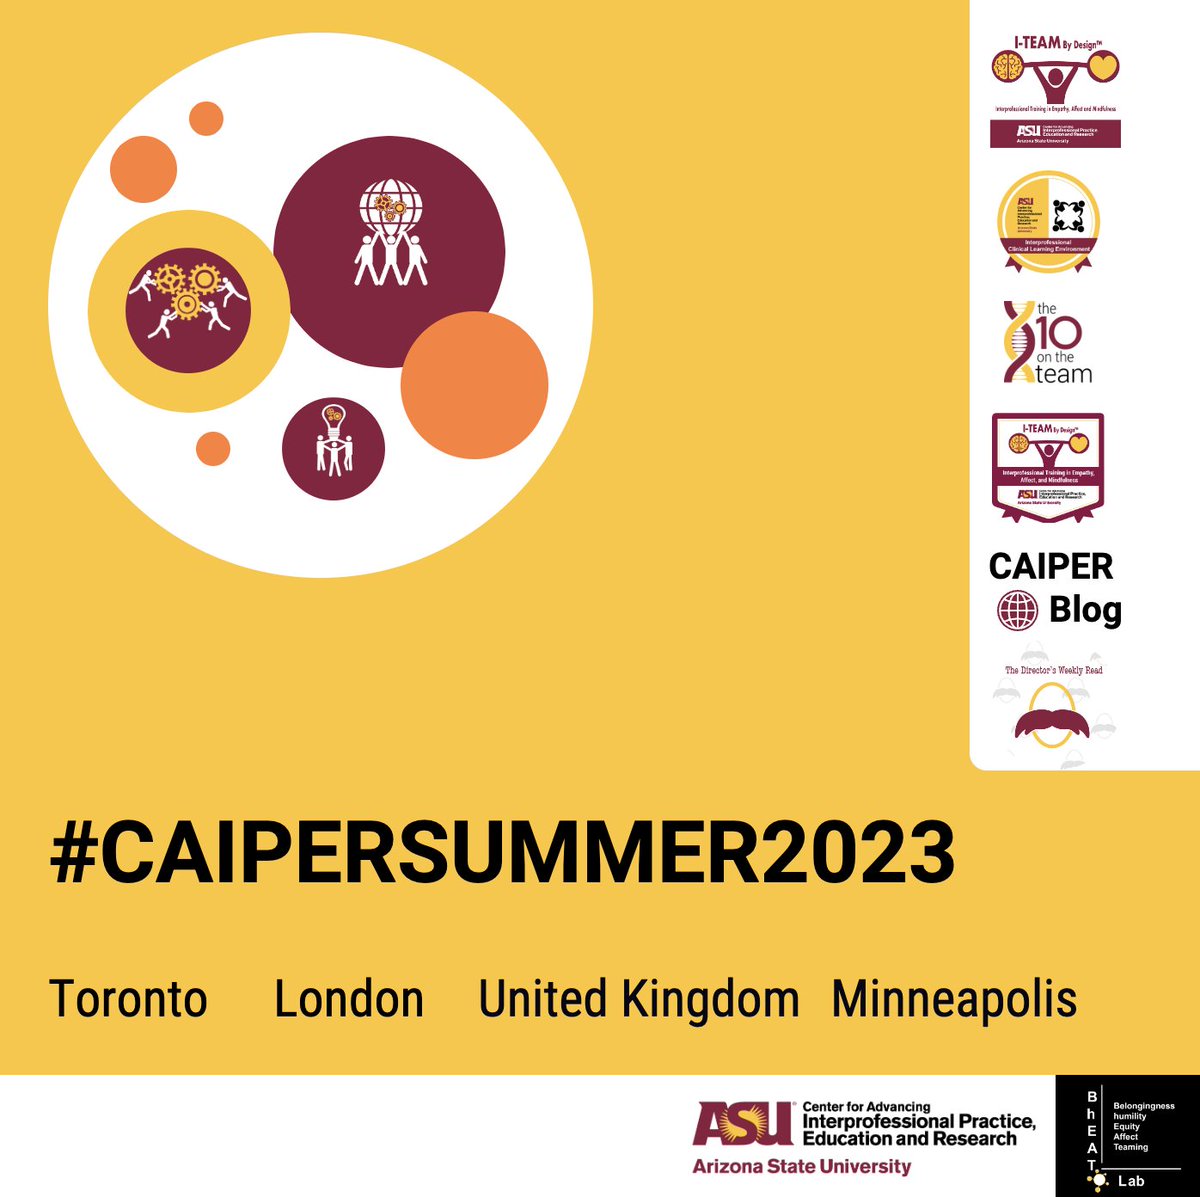 ...it's happening...#CAIPERSummer2023...

Stay connected for all NEW happenings from @asucaiper & @CAIPERBhEATLab!
🌐 ipe.asu.edu
🌐ipe.asu.edu/bheat-lab

#belongingness #humility #empathy #affect #teaming #collaboration #humilityparadigm #IPE #IPP #ITEAMByDesign